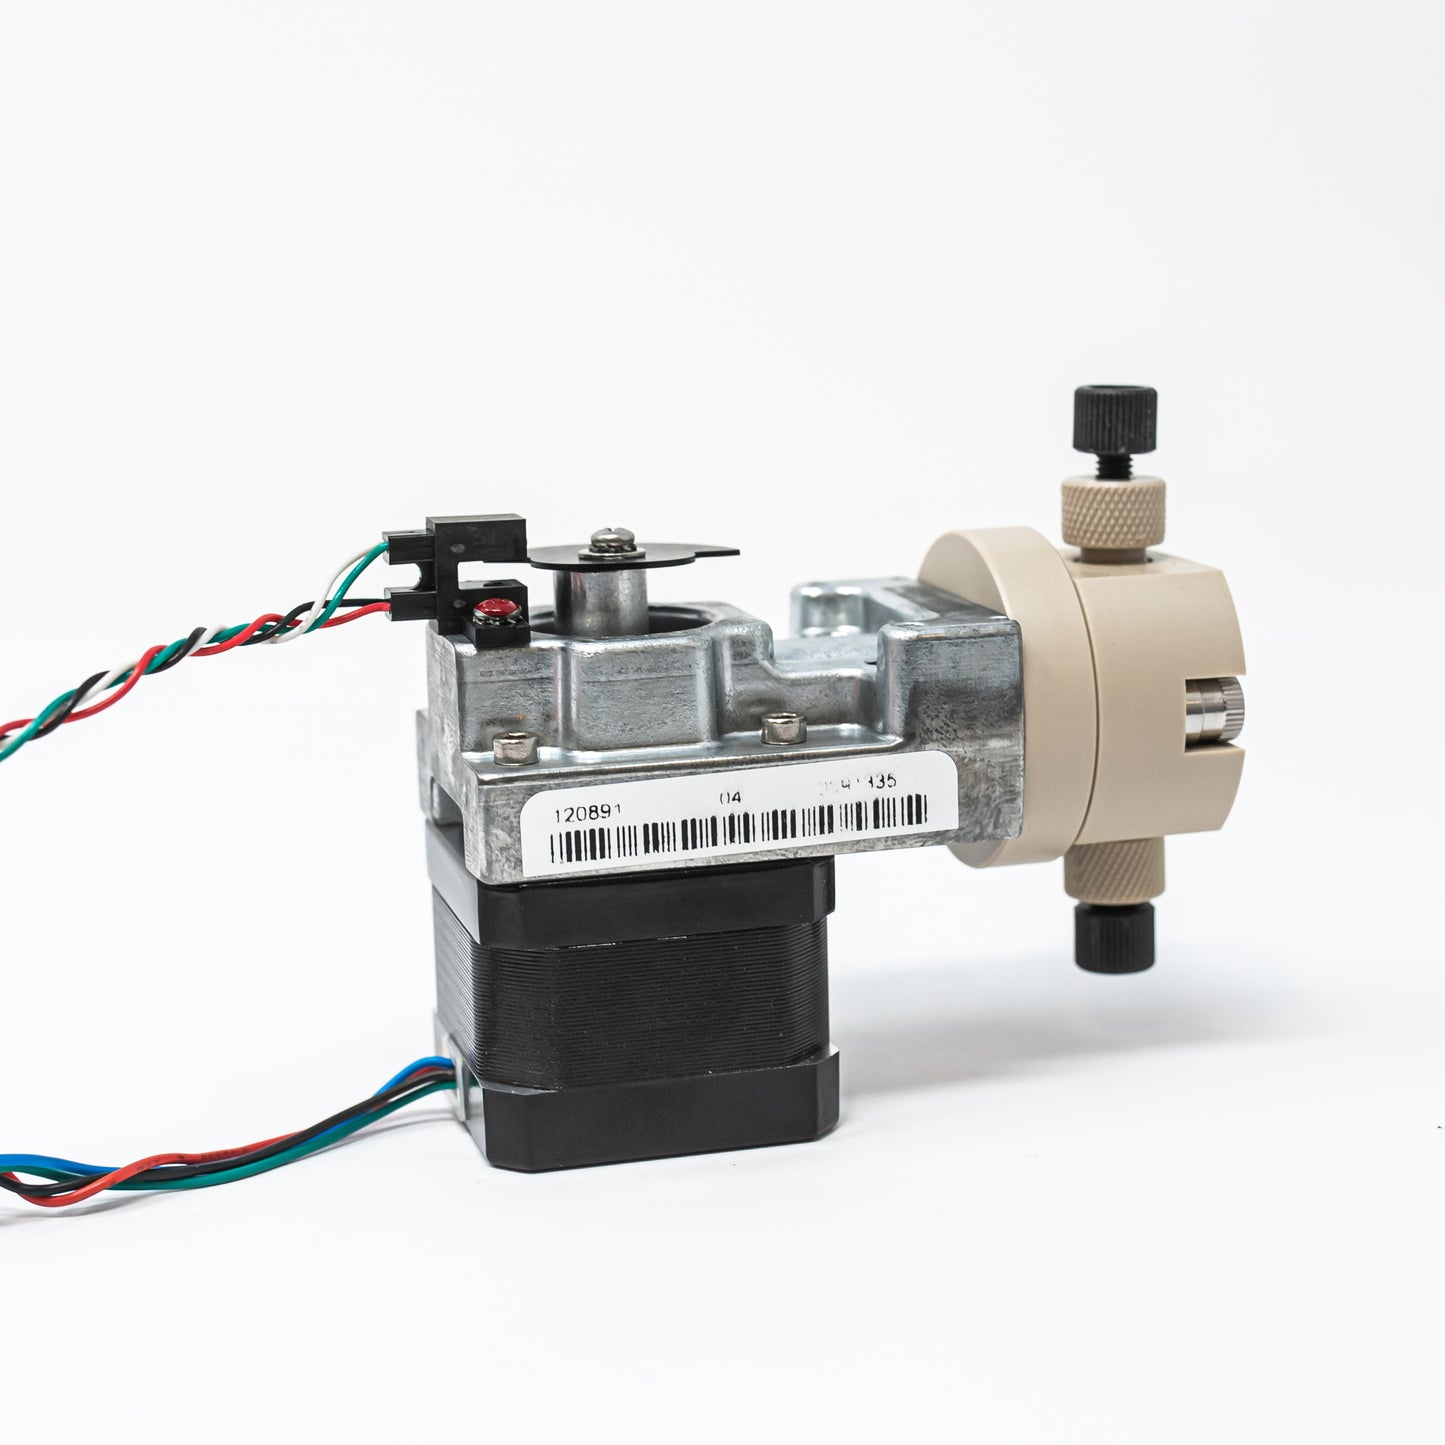 Single head positive displacement pump, stepper motor and optical switch